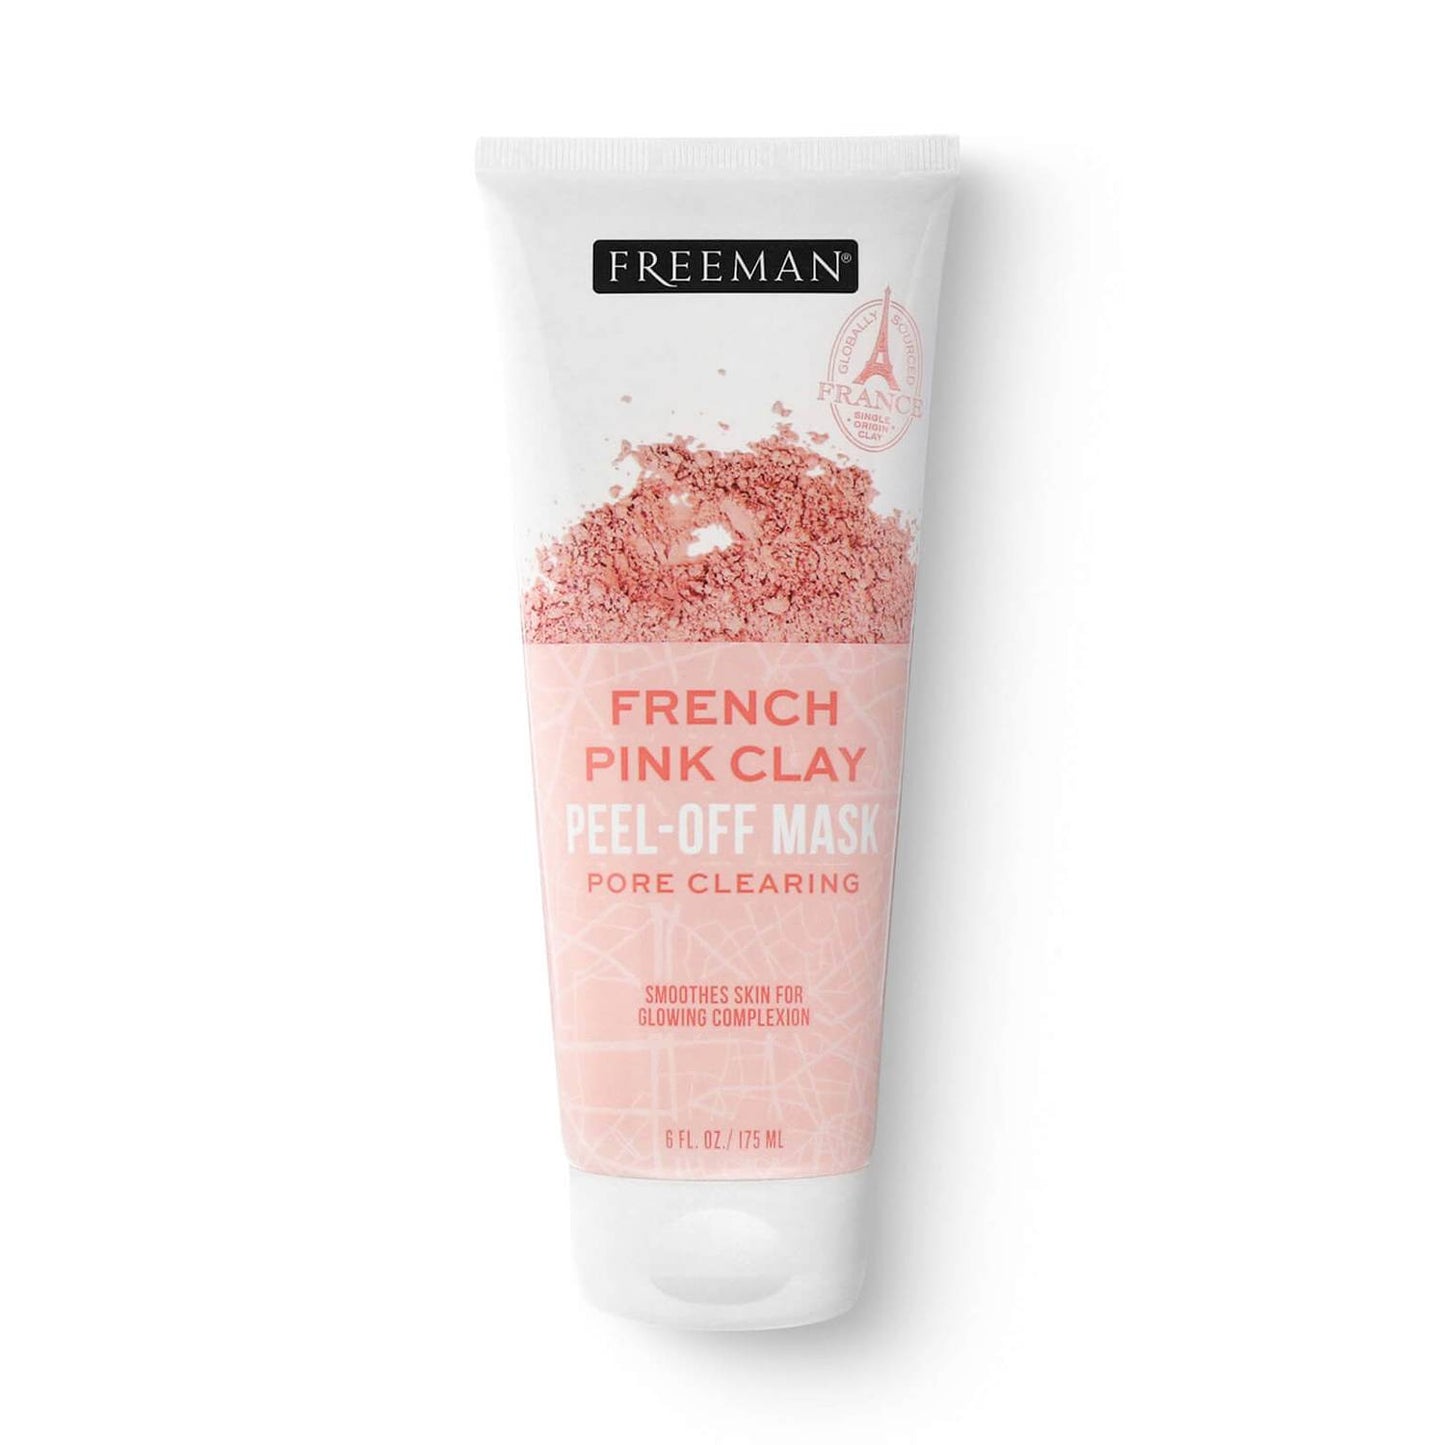 Freeman  French Pink Clay Peel-Off Mask Size 6.0 oz